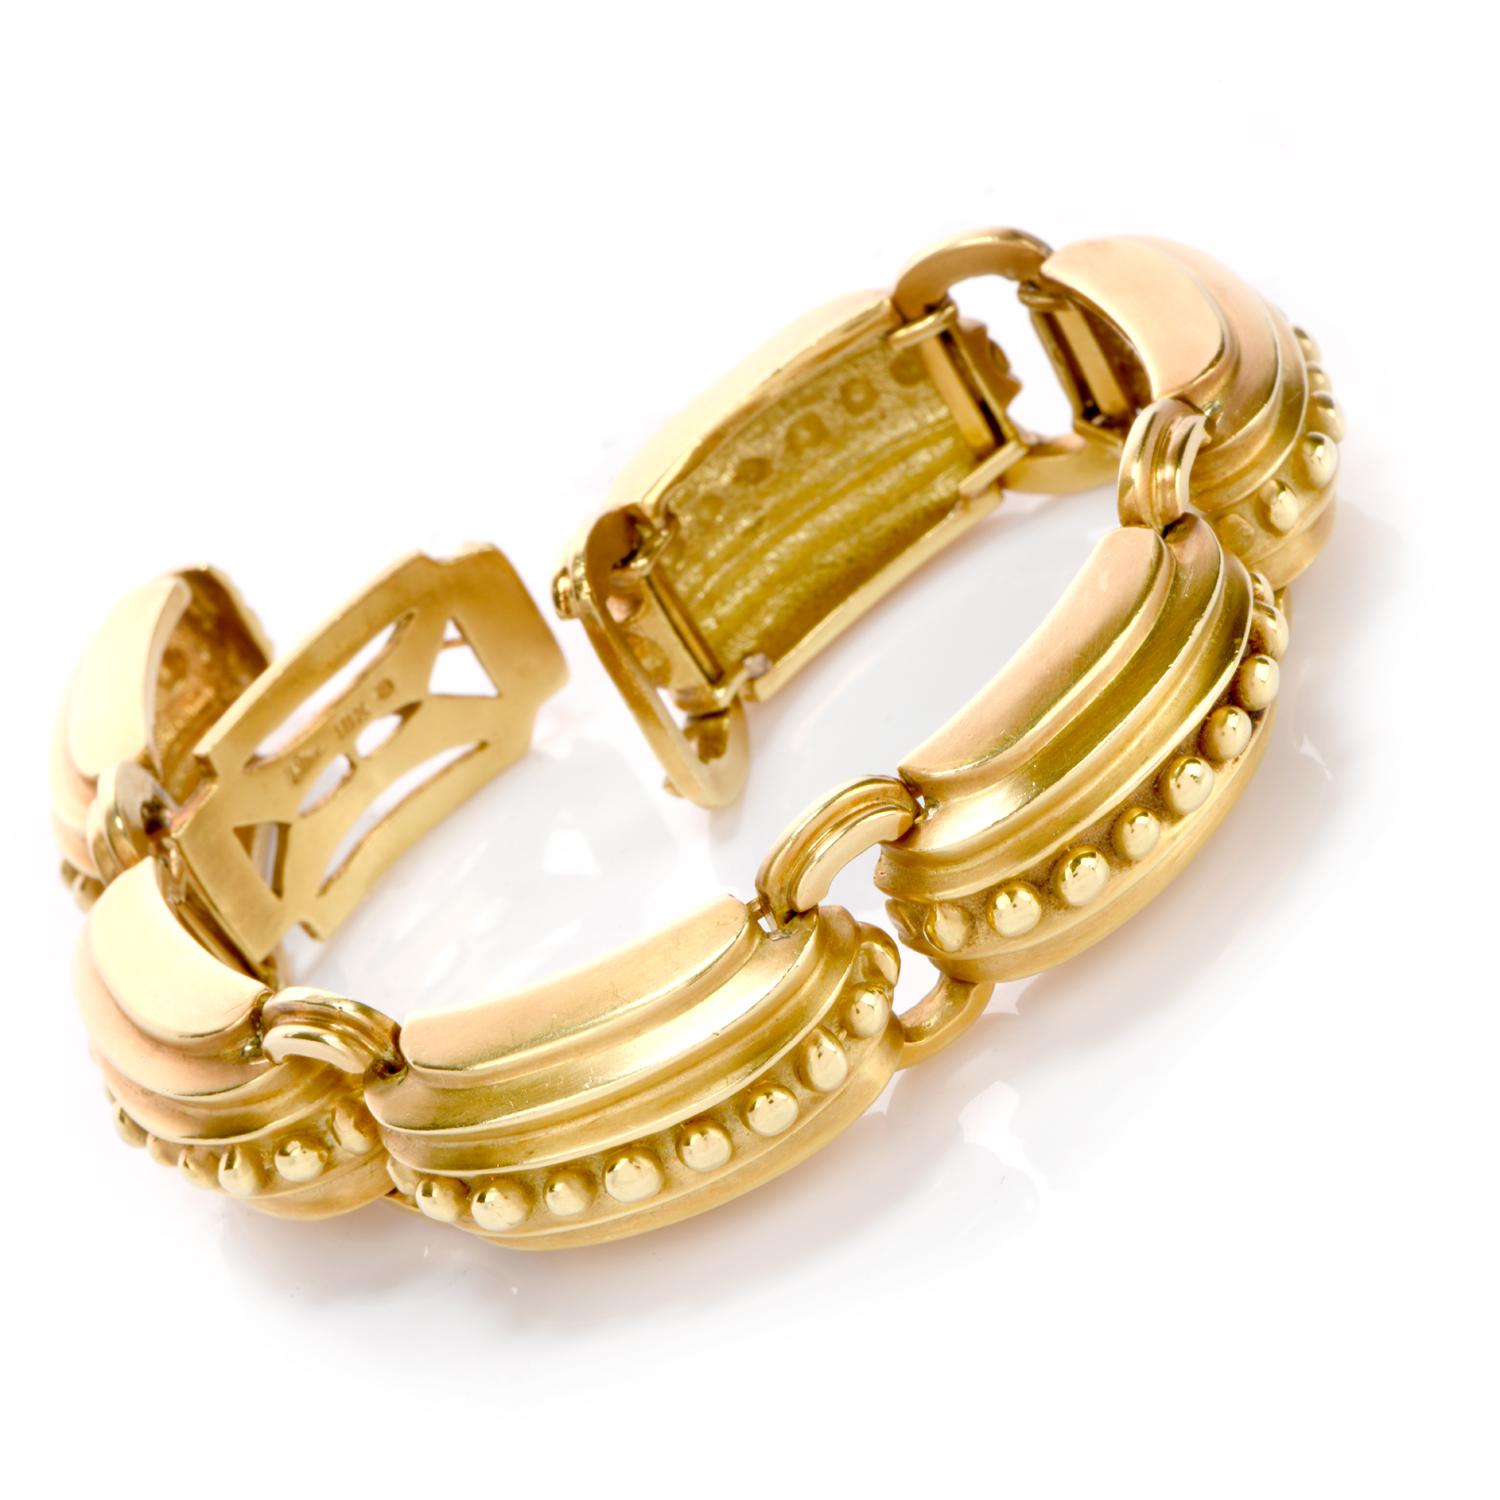 This beautiful Marlend Stowe bracelet was crafted in 86.6 grams of solid 18K green gold. Each link offers a nautical elemt as each are ribbed from the outside with each ridge higher than the last.  

Atop the staired design are are large polished